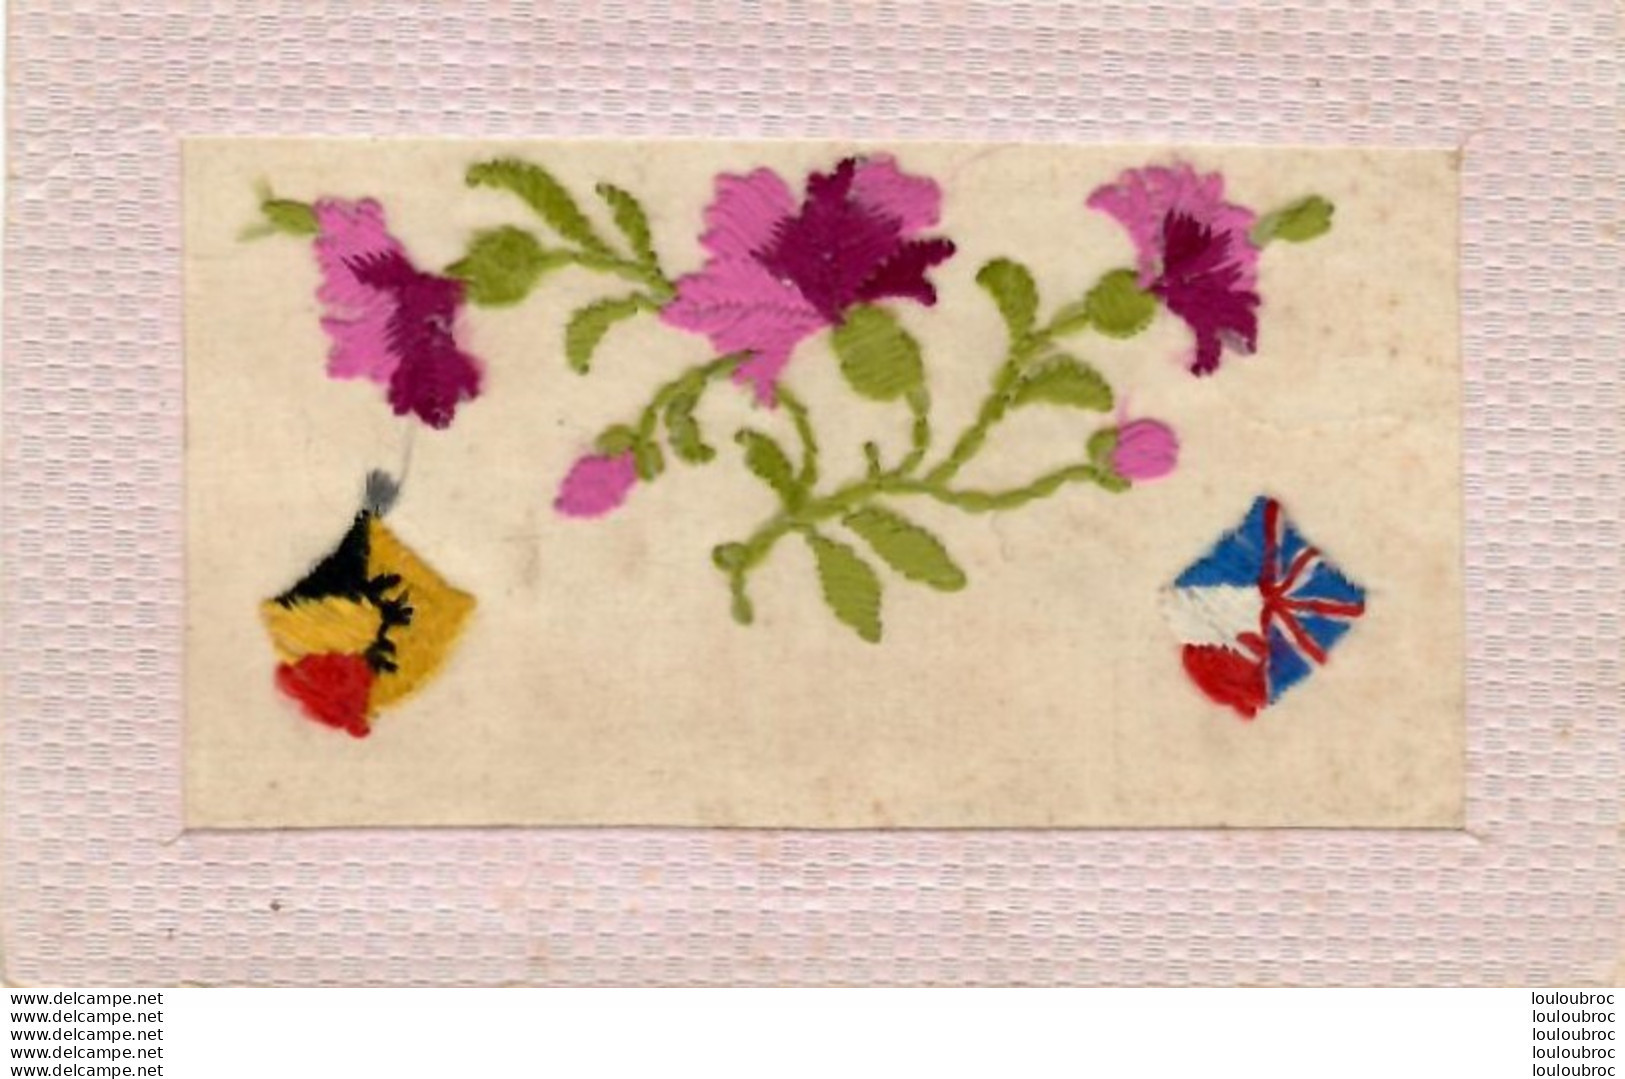 CARTE BRODEE ET DRAPEAUX - Embroidered